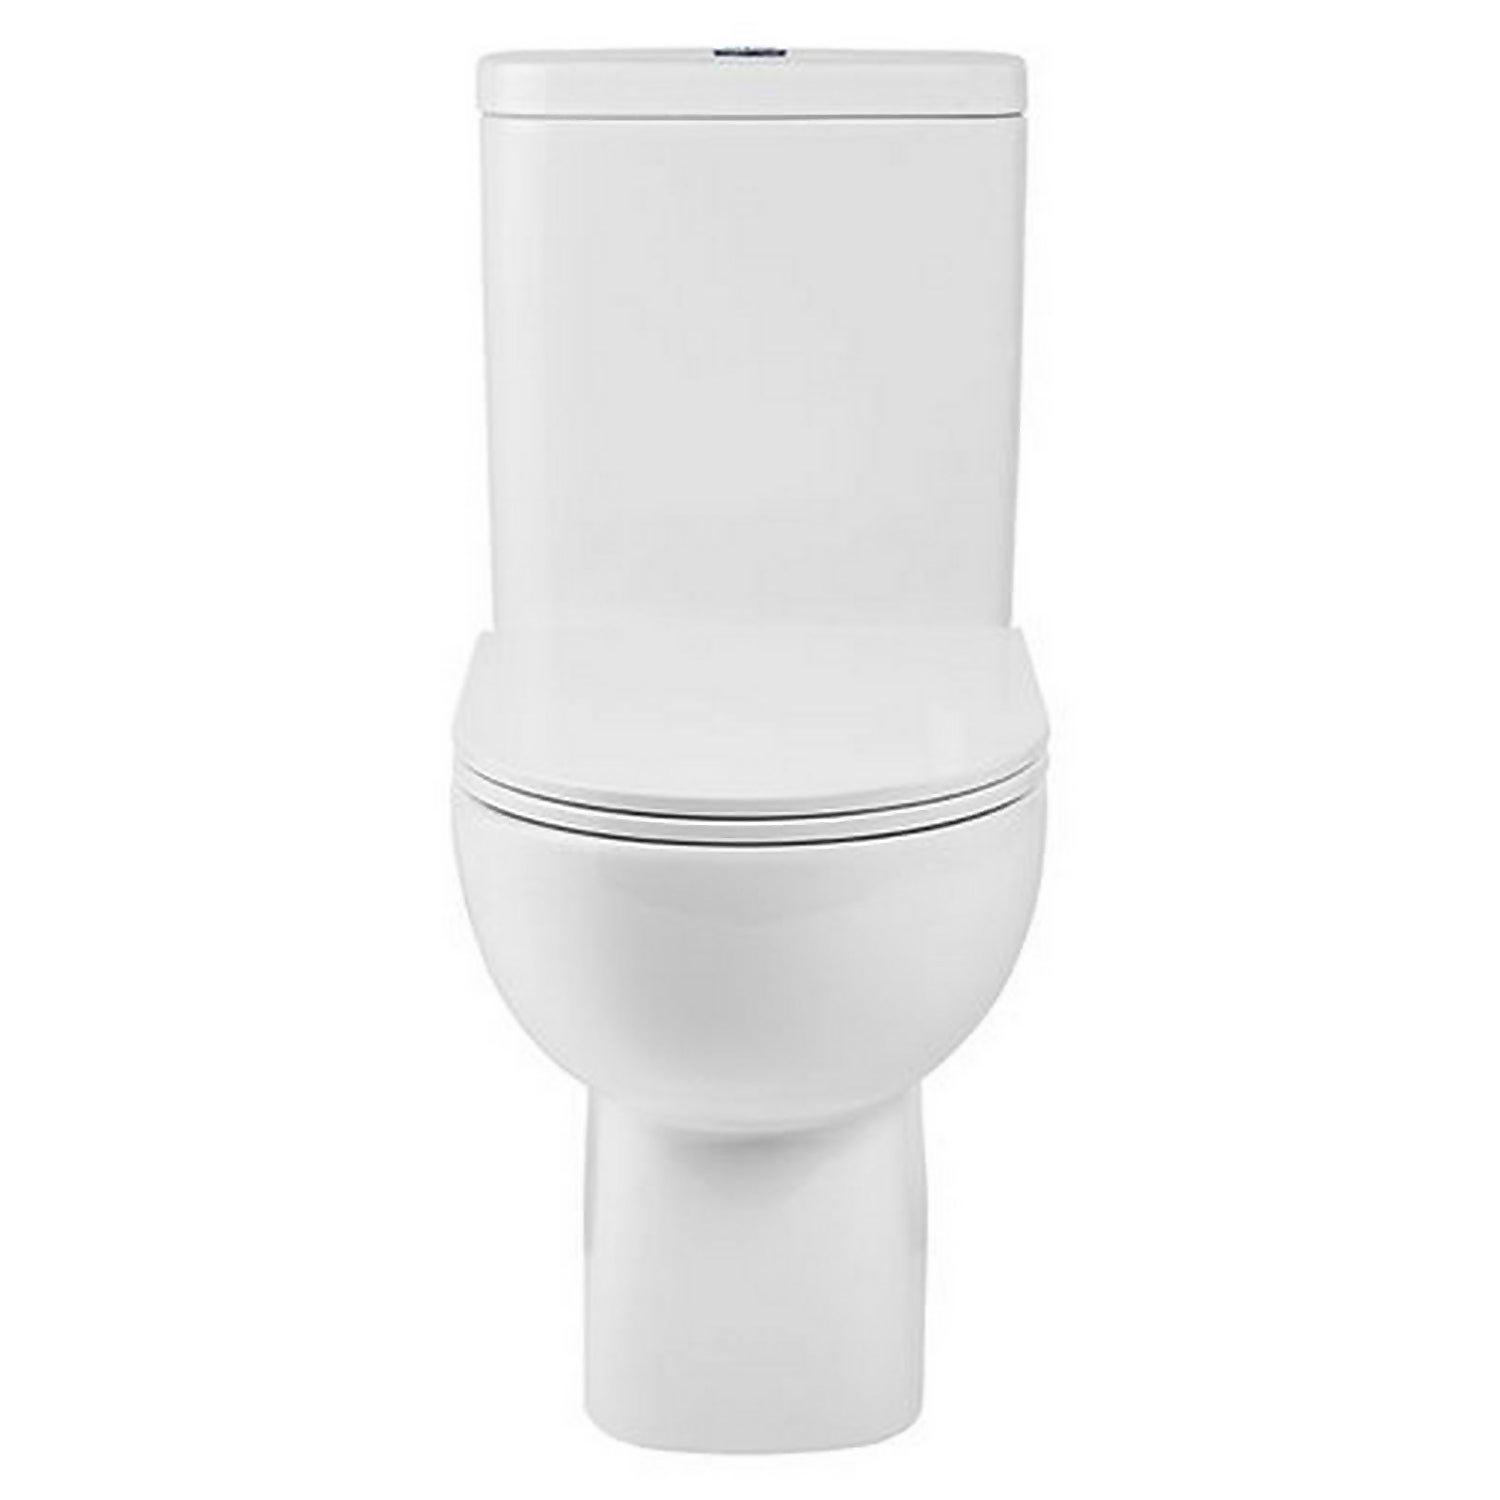 Newton Open Back Close Coupled Toilet with Soft Close Toilet Seat